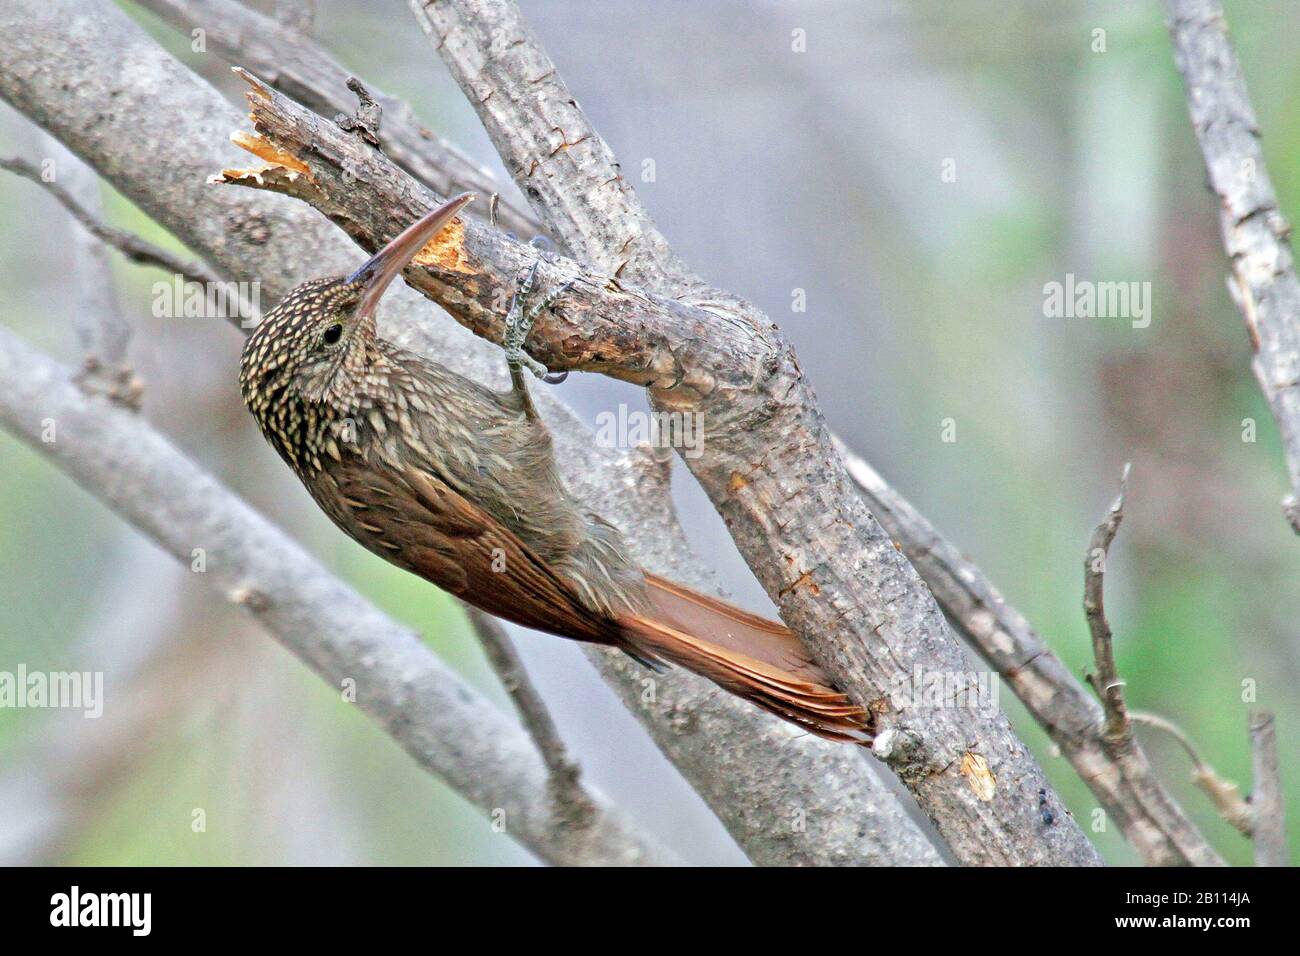 ivory-billed woodcreeper (Xiphorhynchus flavigaster), on a tree, Mexico Stock Photo